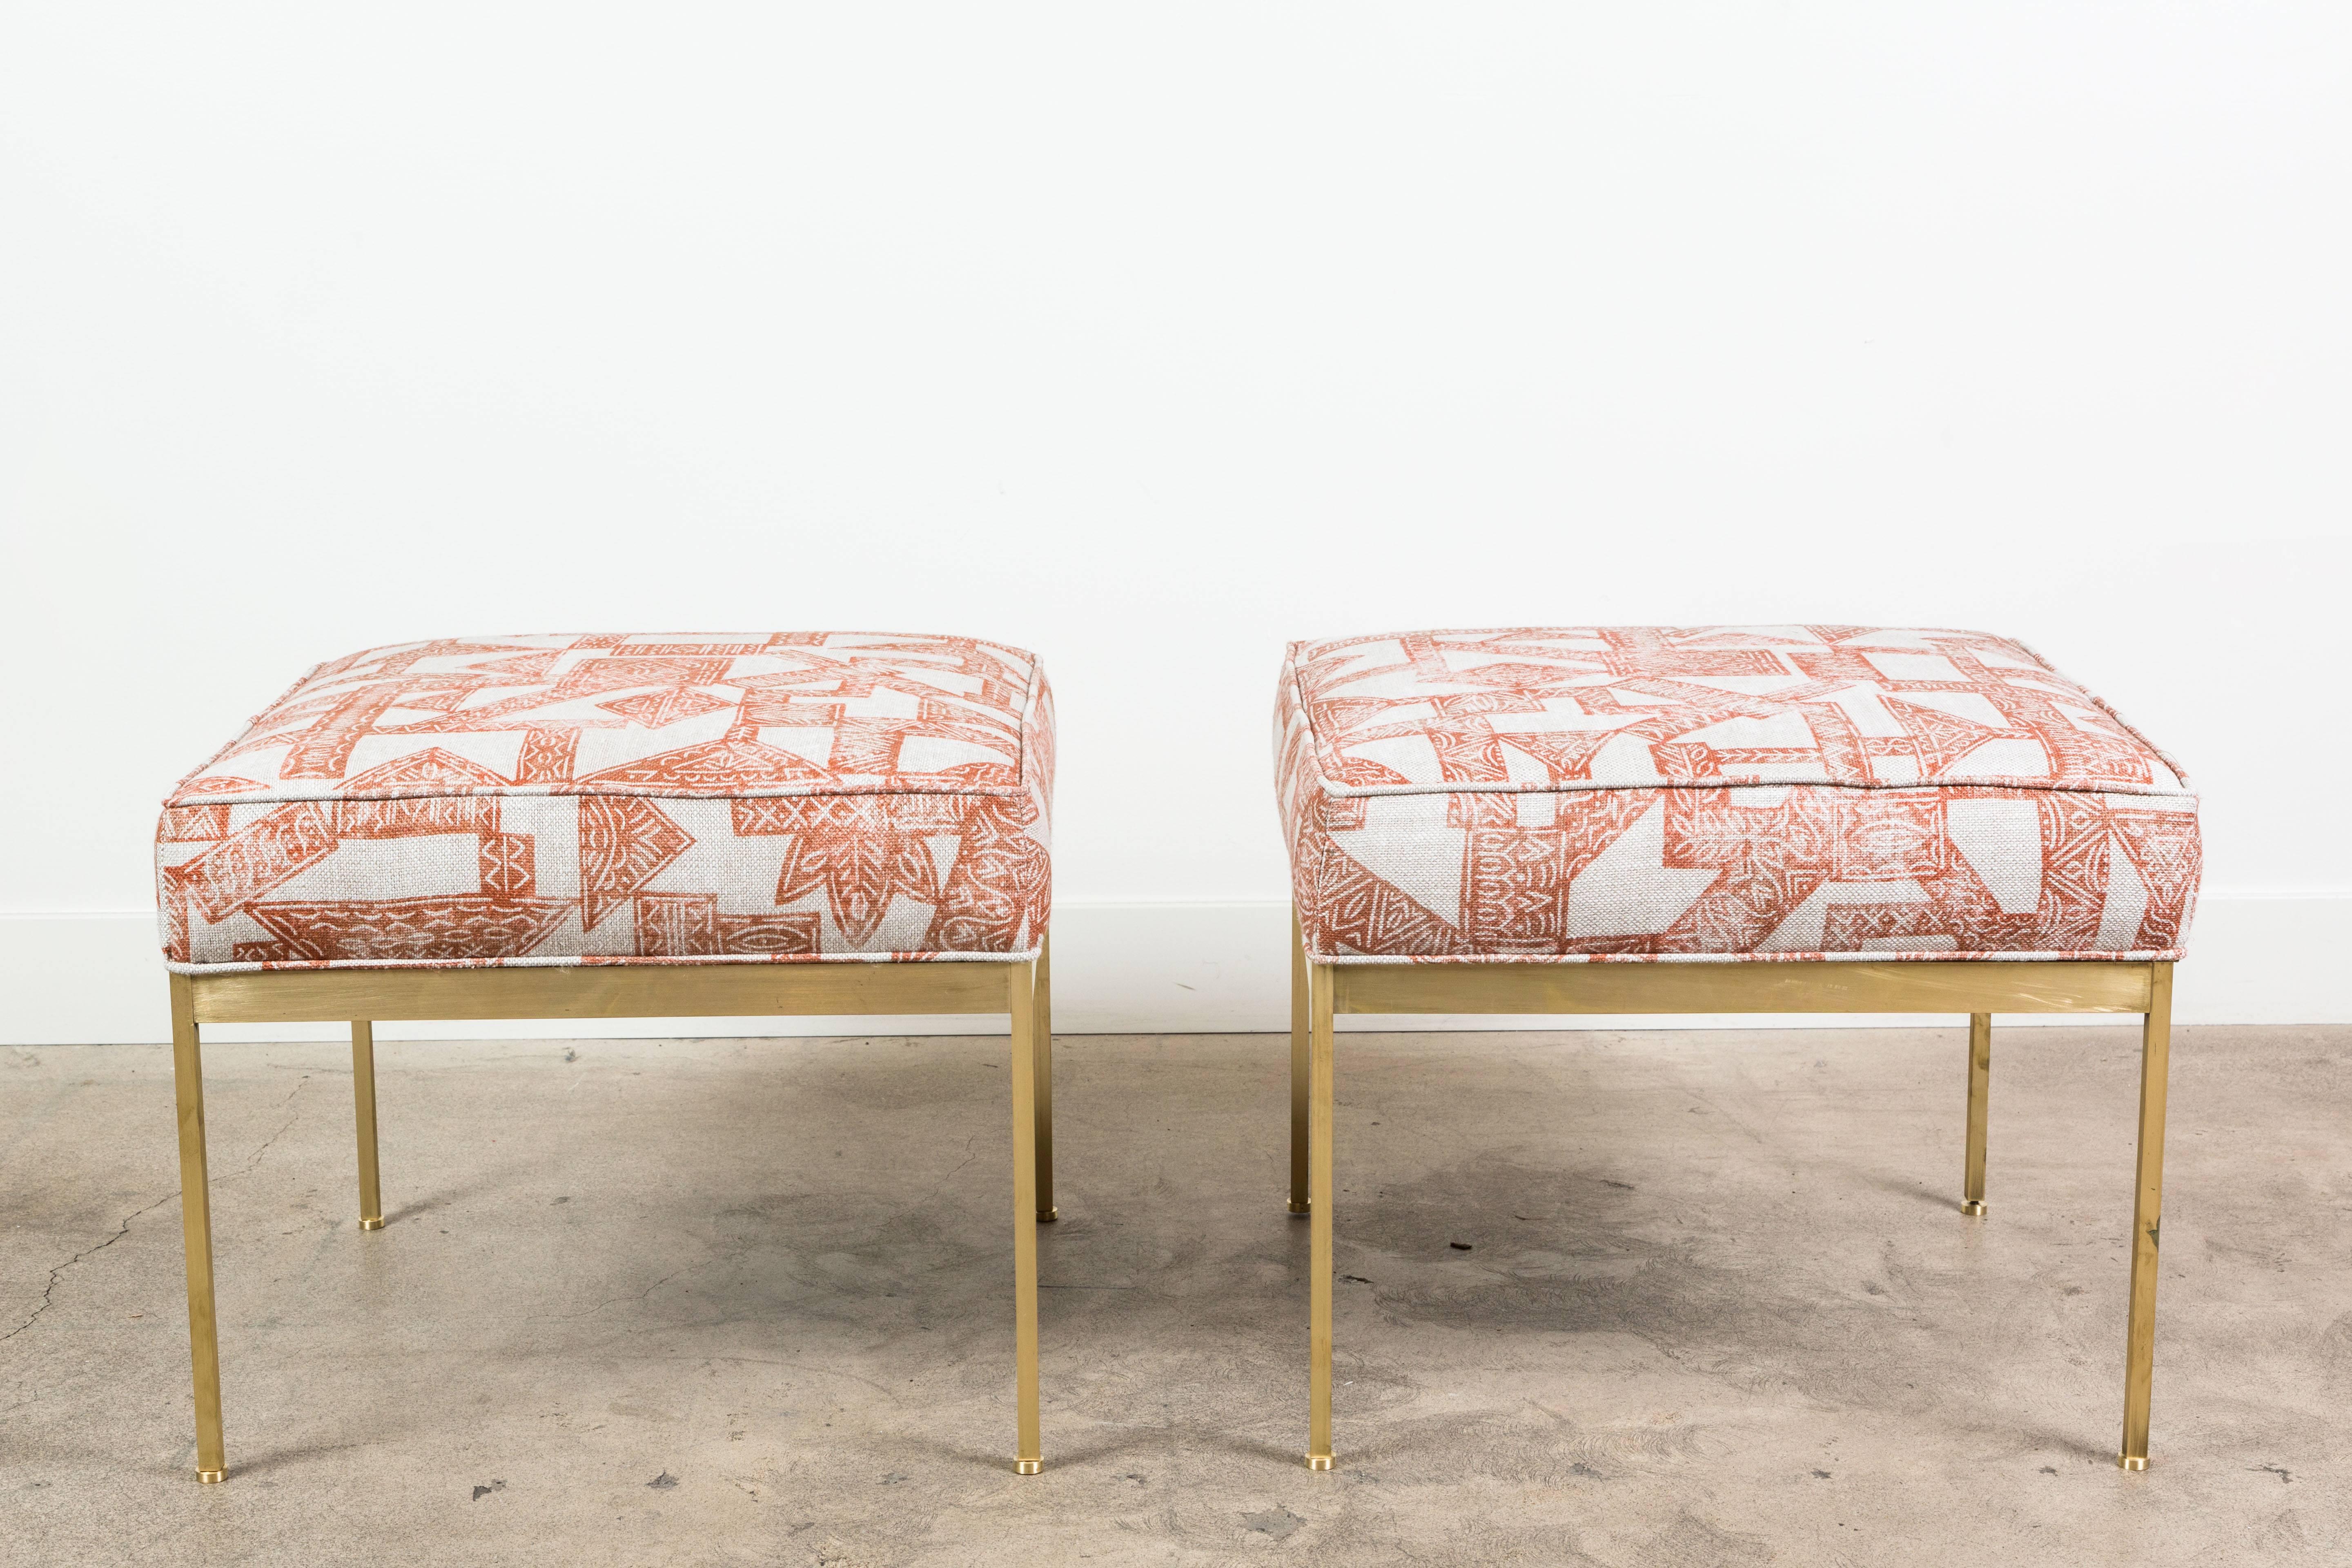 The Paul Ottoman features a solid unlacquered brass base and an upholstered seat with piping. Each leg features a rounded leveler. Shown here in Zak and Fox fabric.

Available to order in customer's own material with a 6-8 week lead time.

As shown: